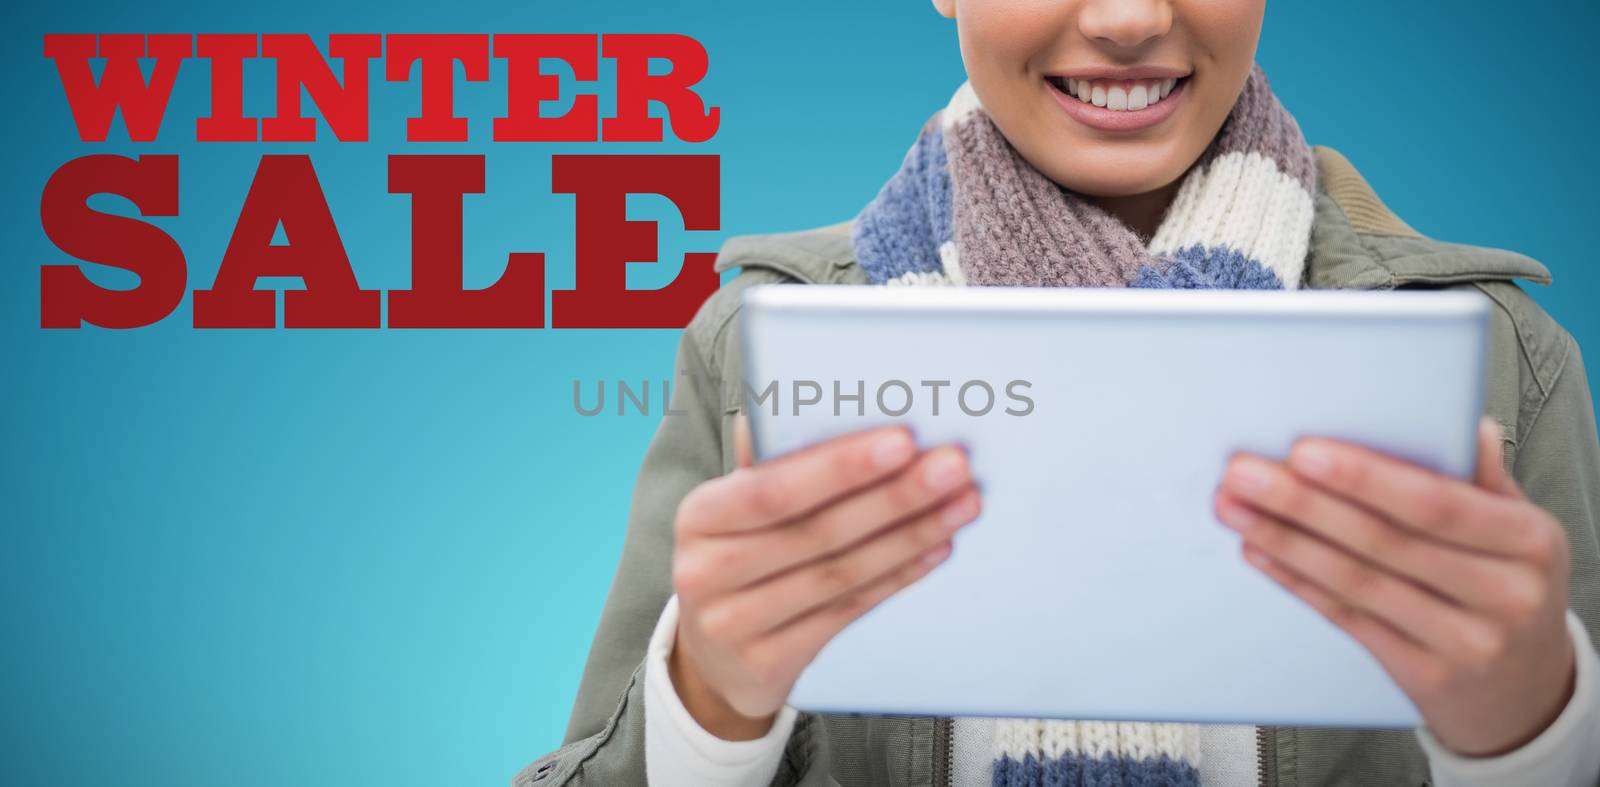 Composite image of composite image of  women holding tablet by Wavebreakmedia